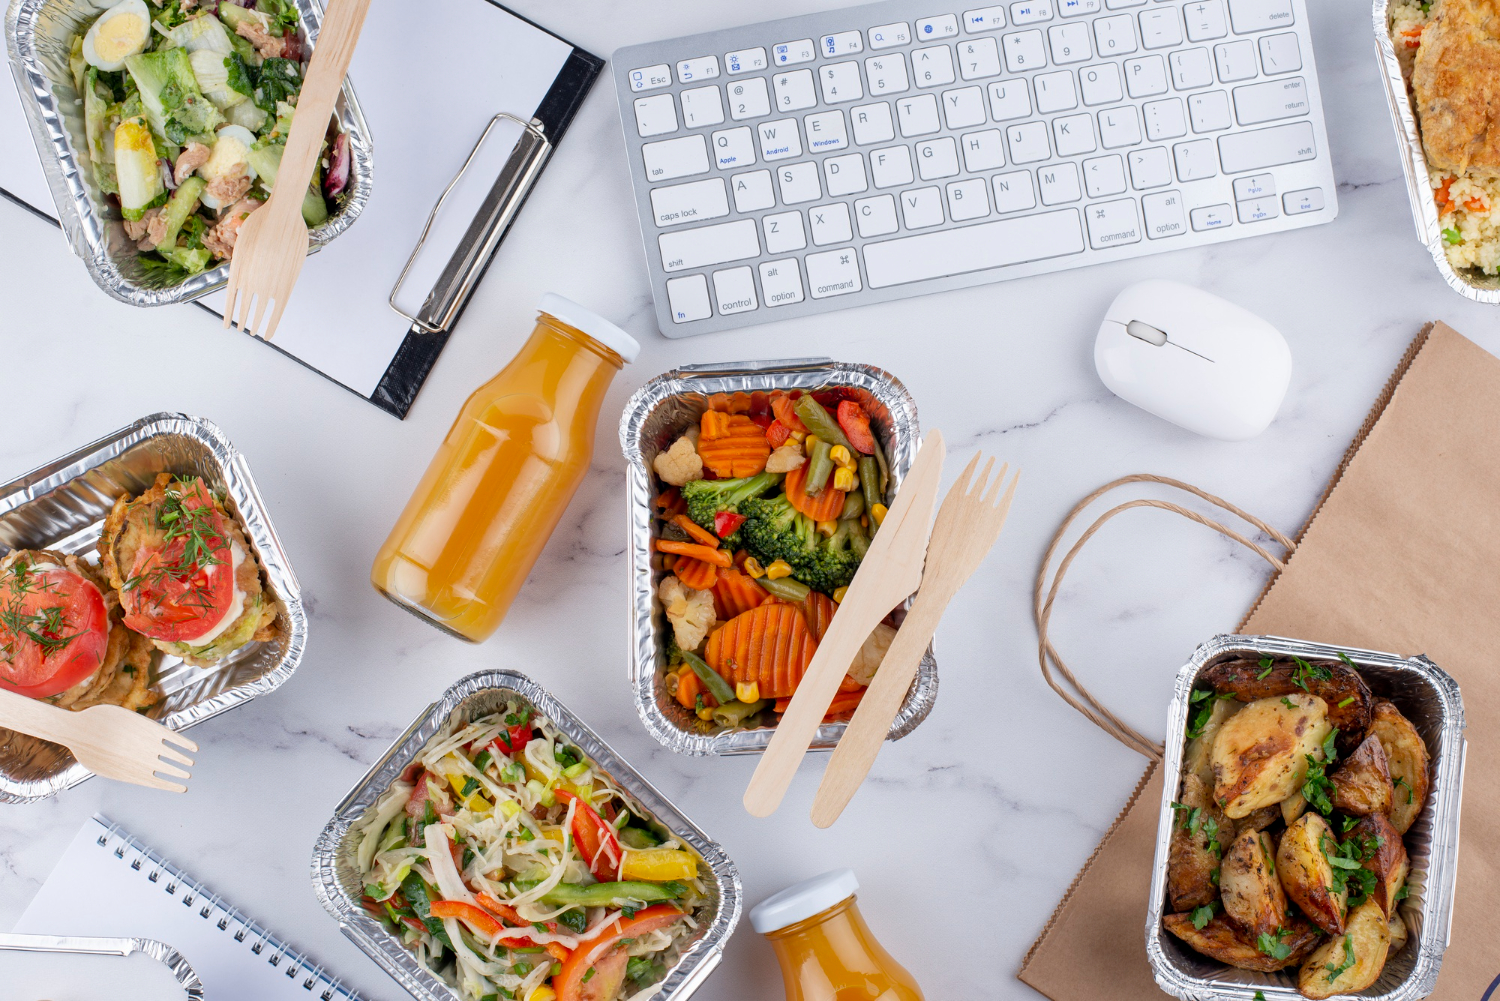 Top view of food meal prep together with keyboard